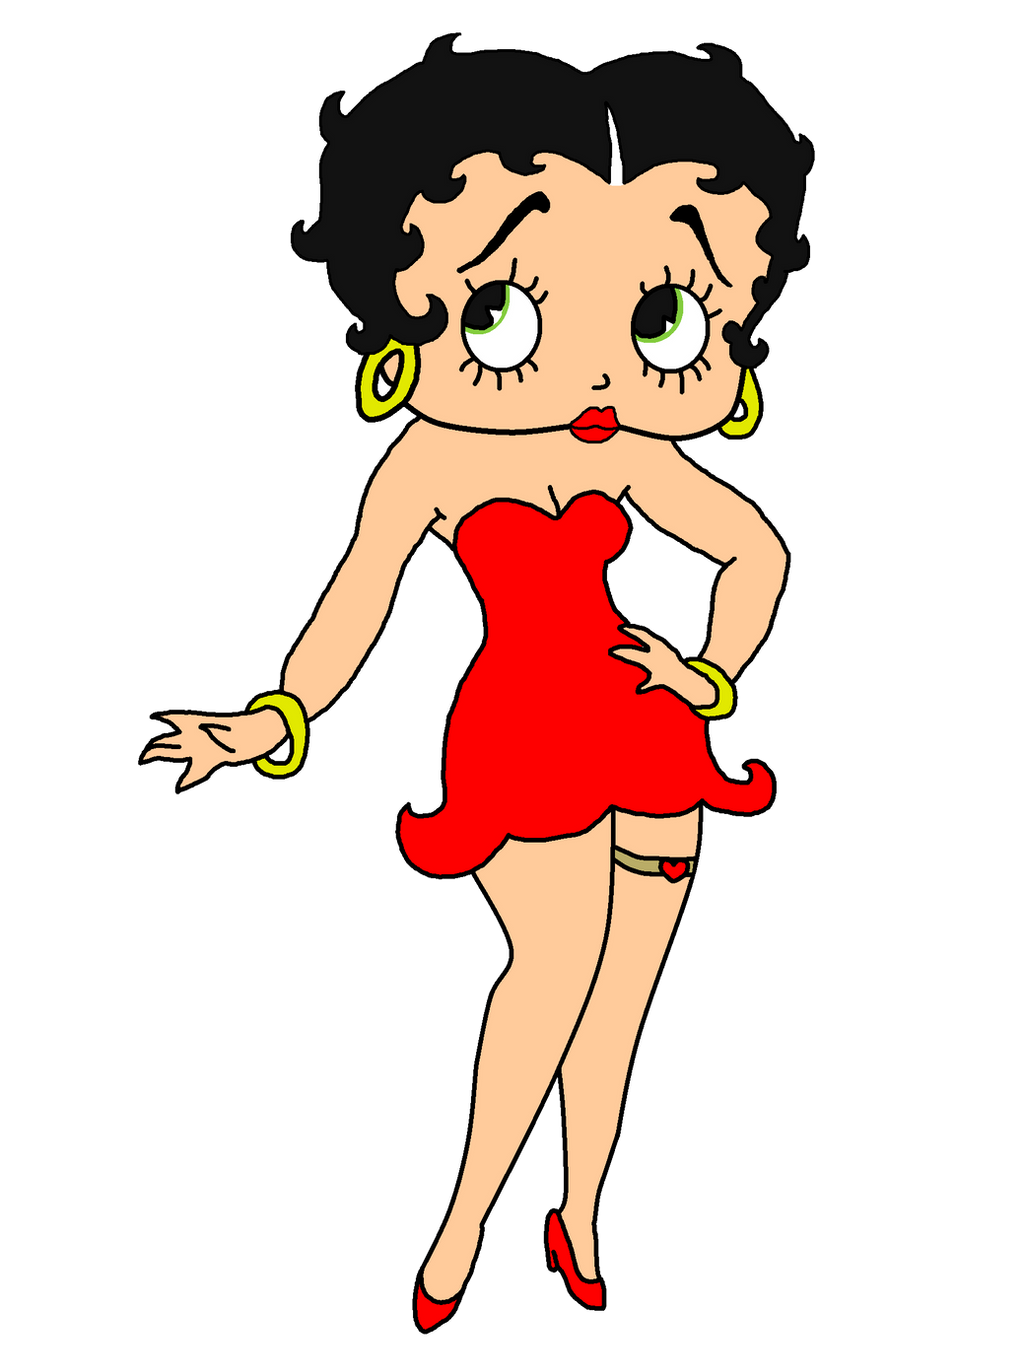 https://wallpapers.com/images/hd/betty-boop-pictures-l5nz5yllq1ff002k.jpg